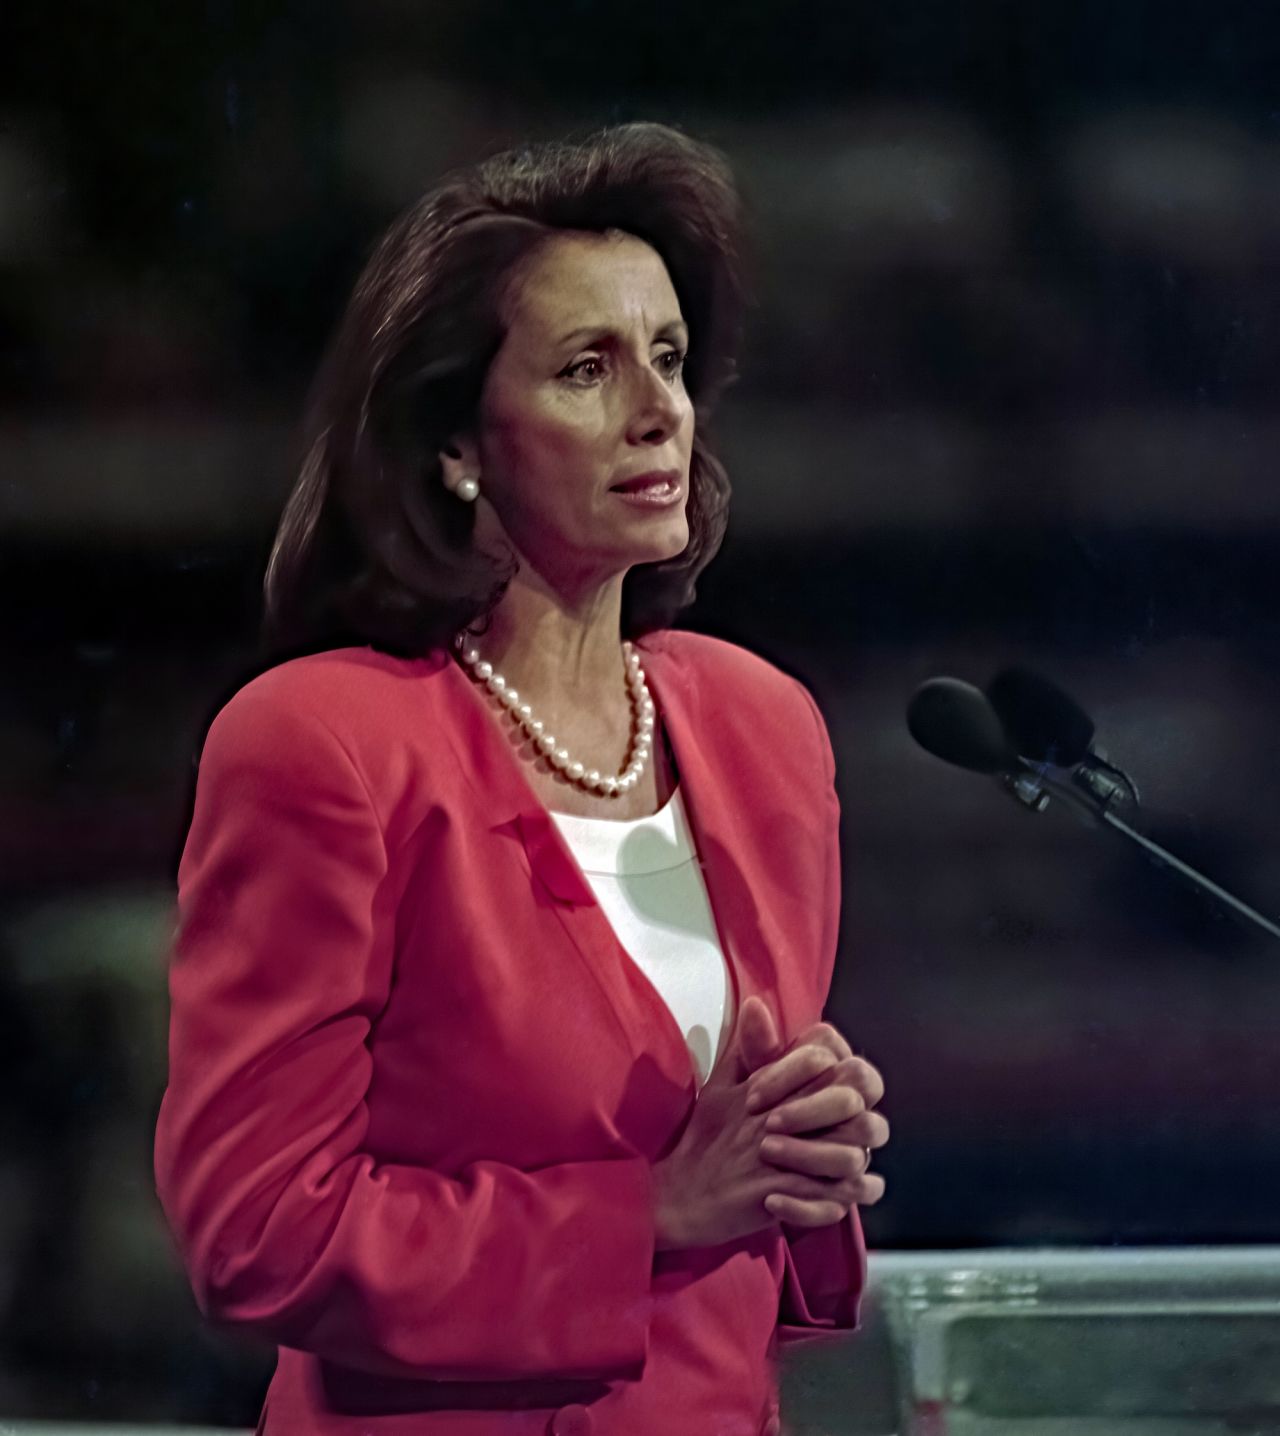 Pelosi delivers the minority report during the Democratic National Nominating Convention at Madison Square Garden in New York in 1992.